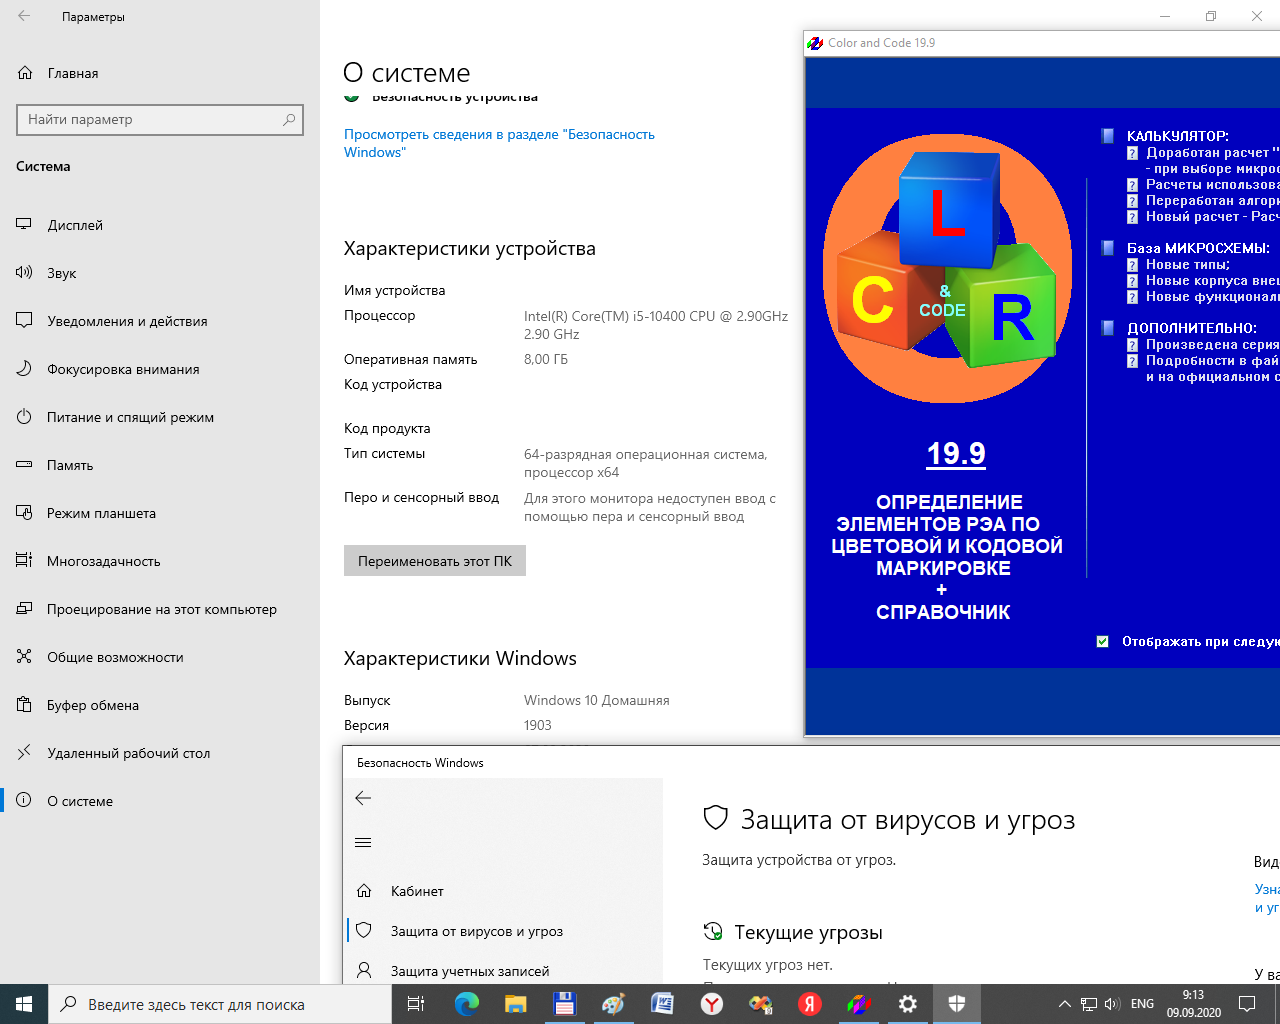 Color and Code и Windows 10 - 64 бит